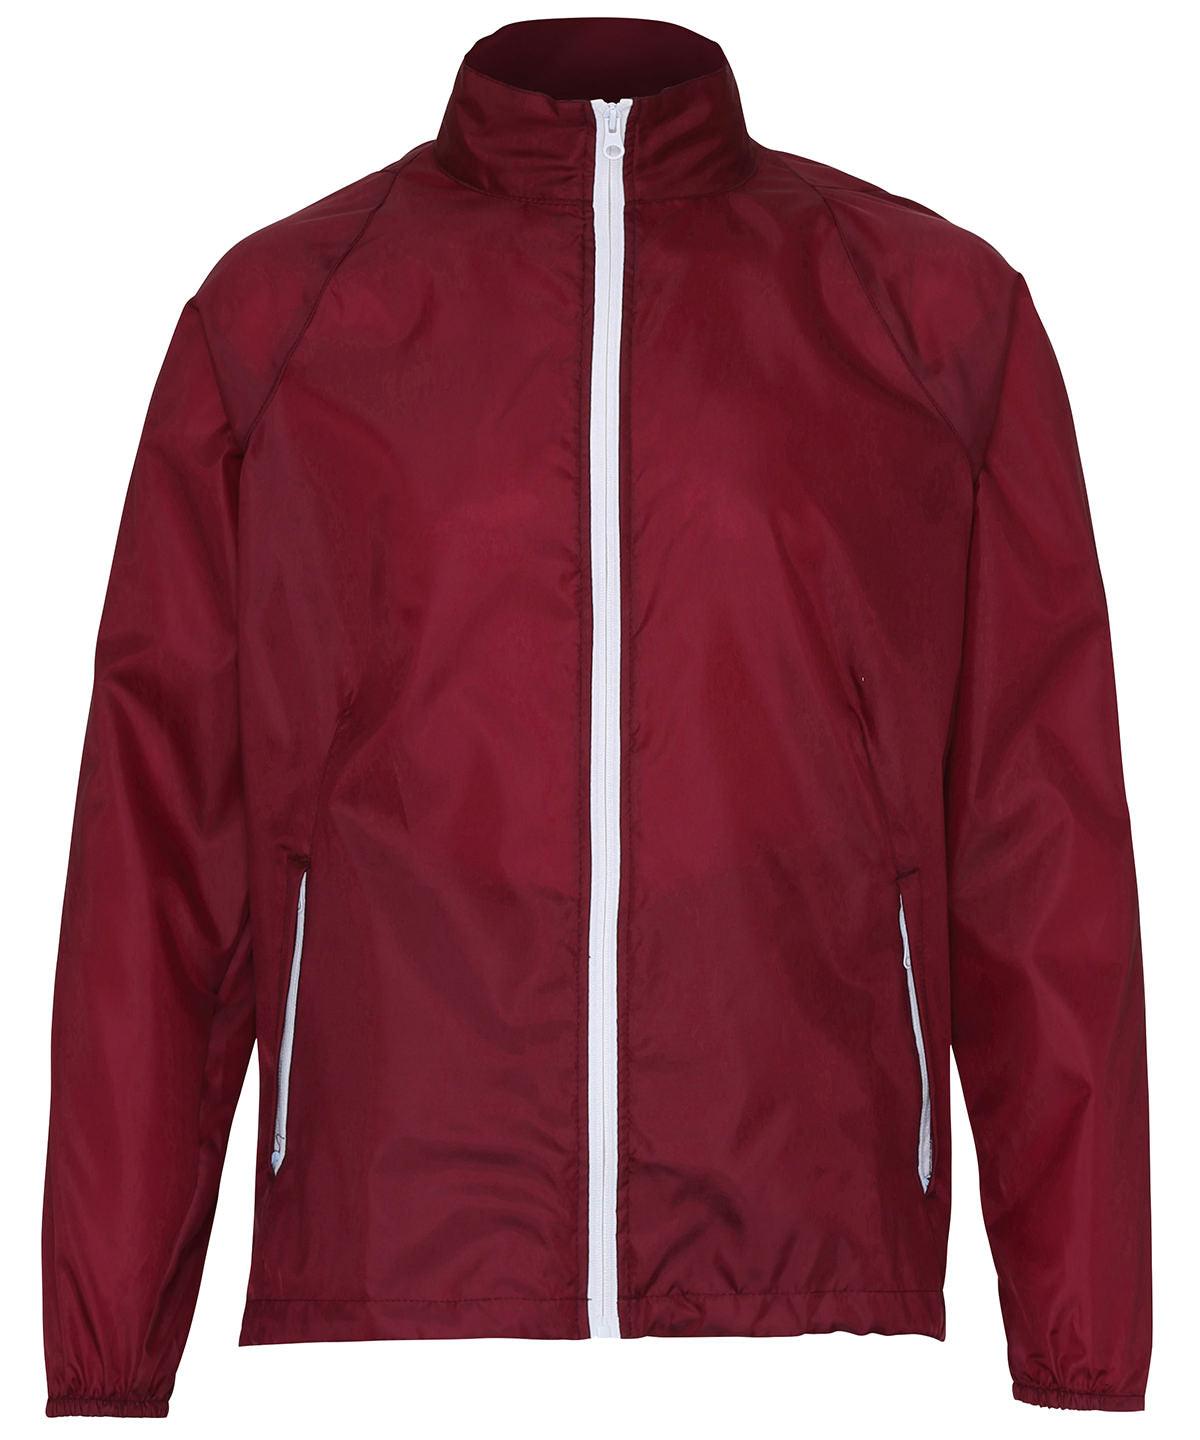 Burgundy/White - Contrast lightweight jacket Jackets 2786 Alfresco Dining, Camo, Jackets & Coats, Lightweight layers, Rebrandable, S/S 19 Trend Colours Schoolwear Centres